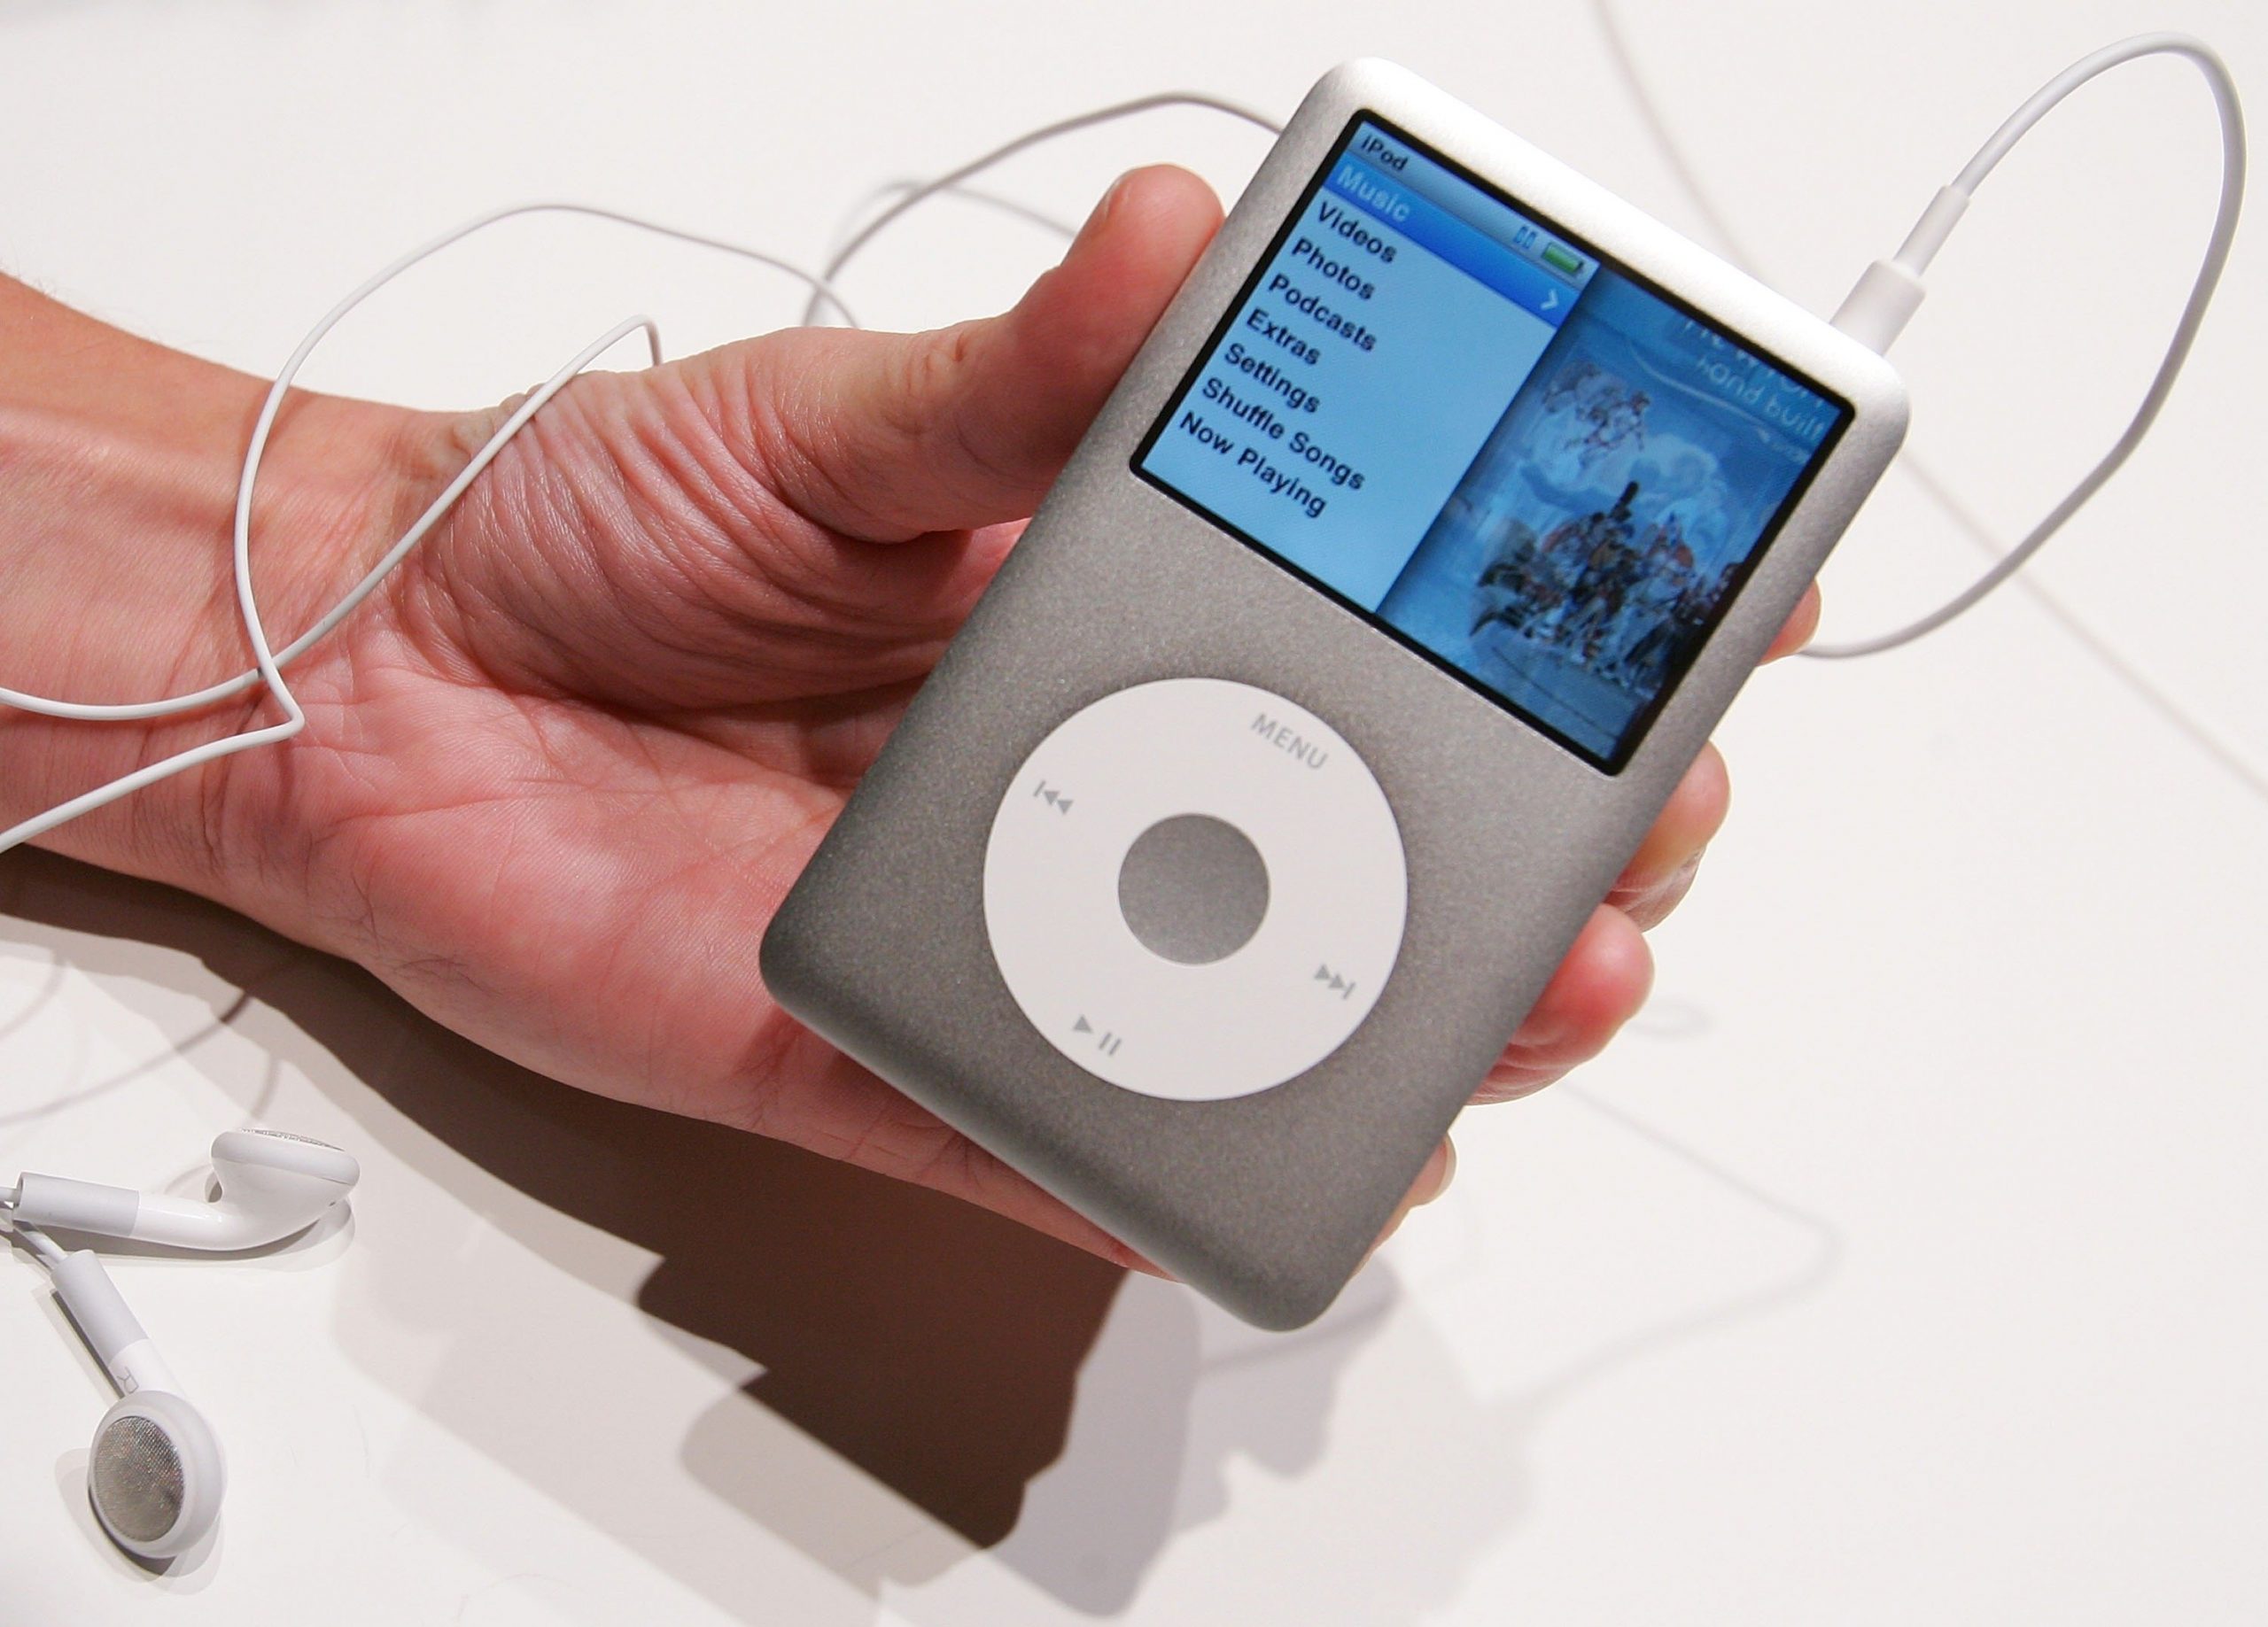 Viral Retro Pod removed from the App Store, so say bye to that old iPod feeling